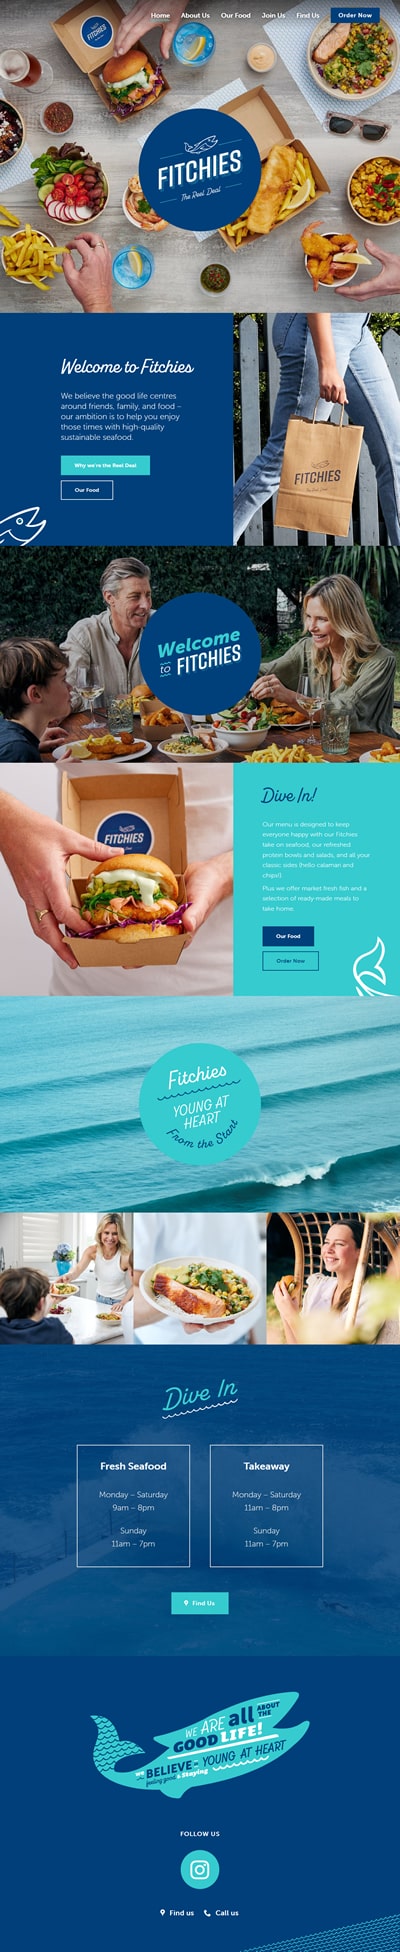 Our Work Hospitality Tourism Website Design Fitchies